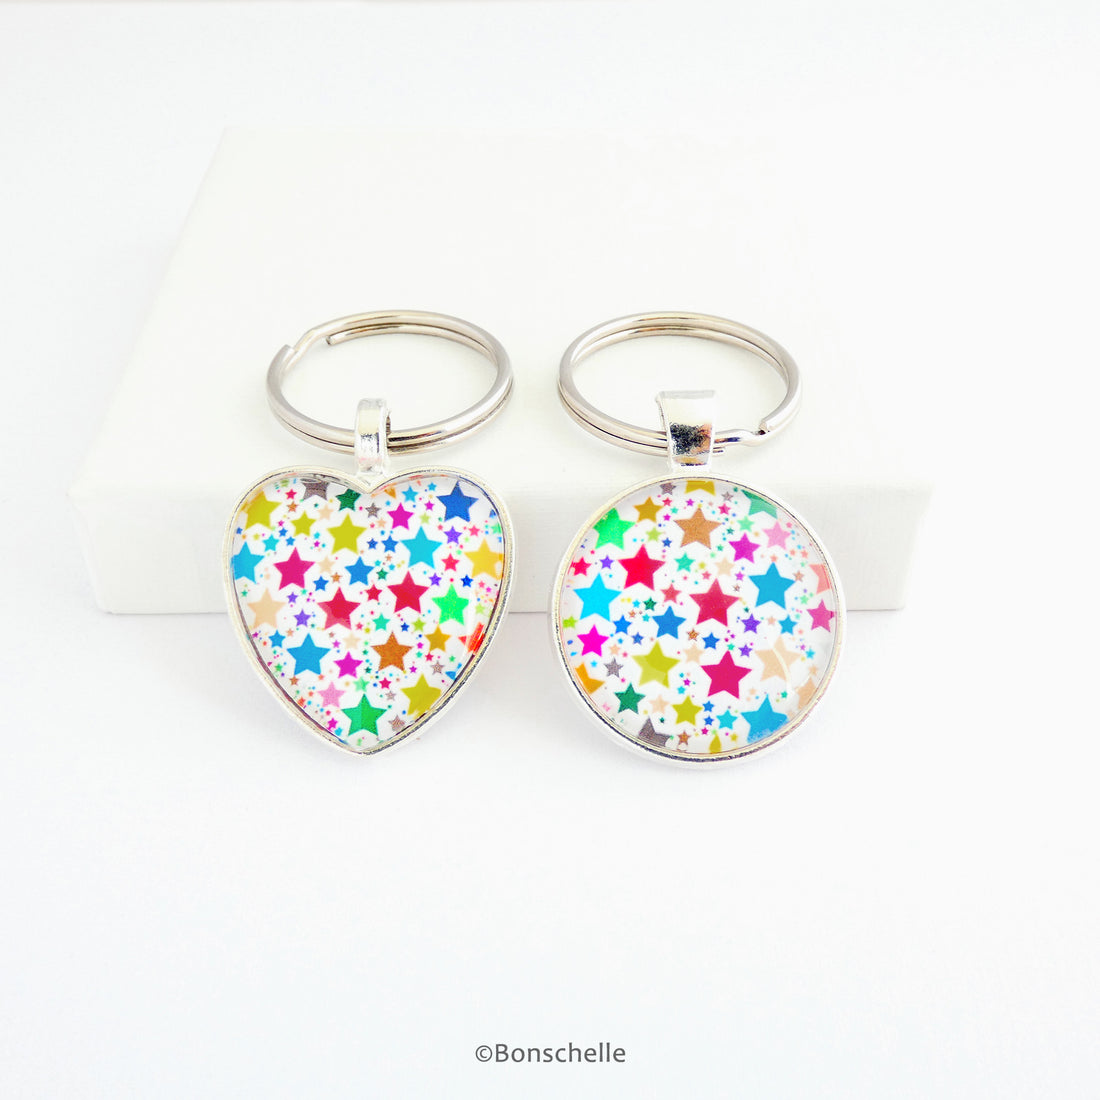 Silver toned metal heart and round shaped keyrings with a multicoloured bright star pattern